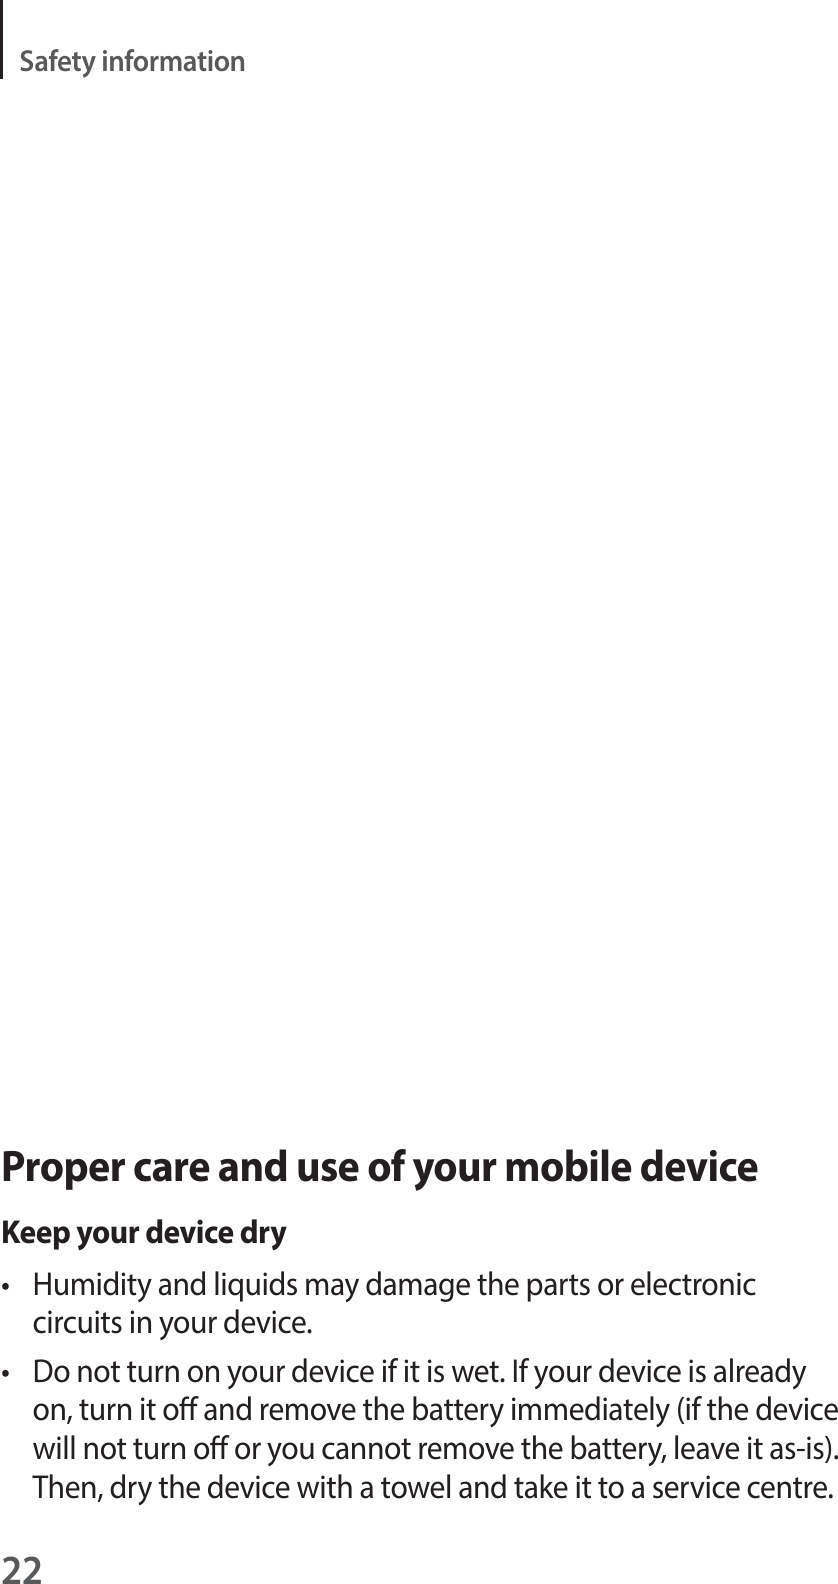 22Safety informationProper care and use of your mobile deviceKeep your device dryt  Humidity and liquids may damage the parts or electronic circuits in your device.t  Do not turn on your device if it is wet. If your device is already on, turn it o and remove the battery immediately (if the device will not turn o or you cannot remove the battery, leave it as-is). Then, dry the device with a towel and take it to a service centre.